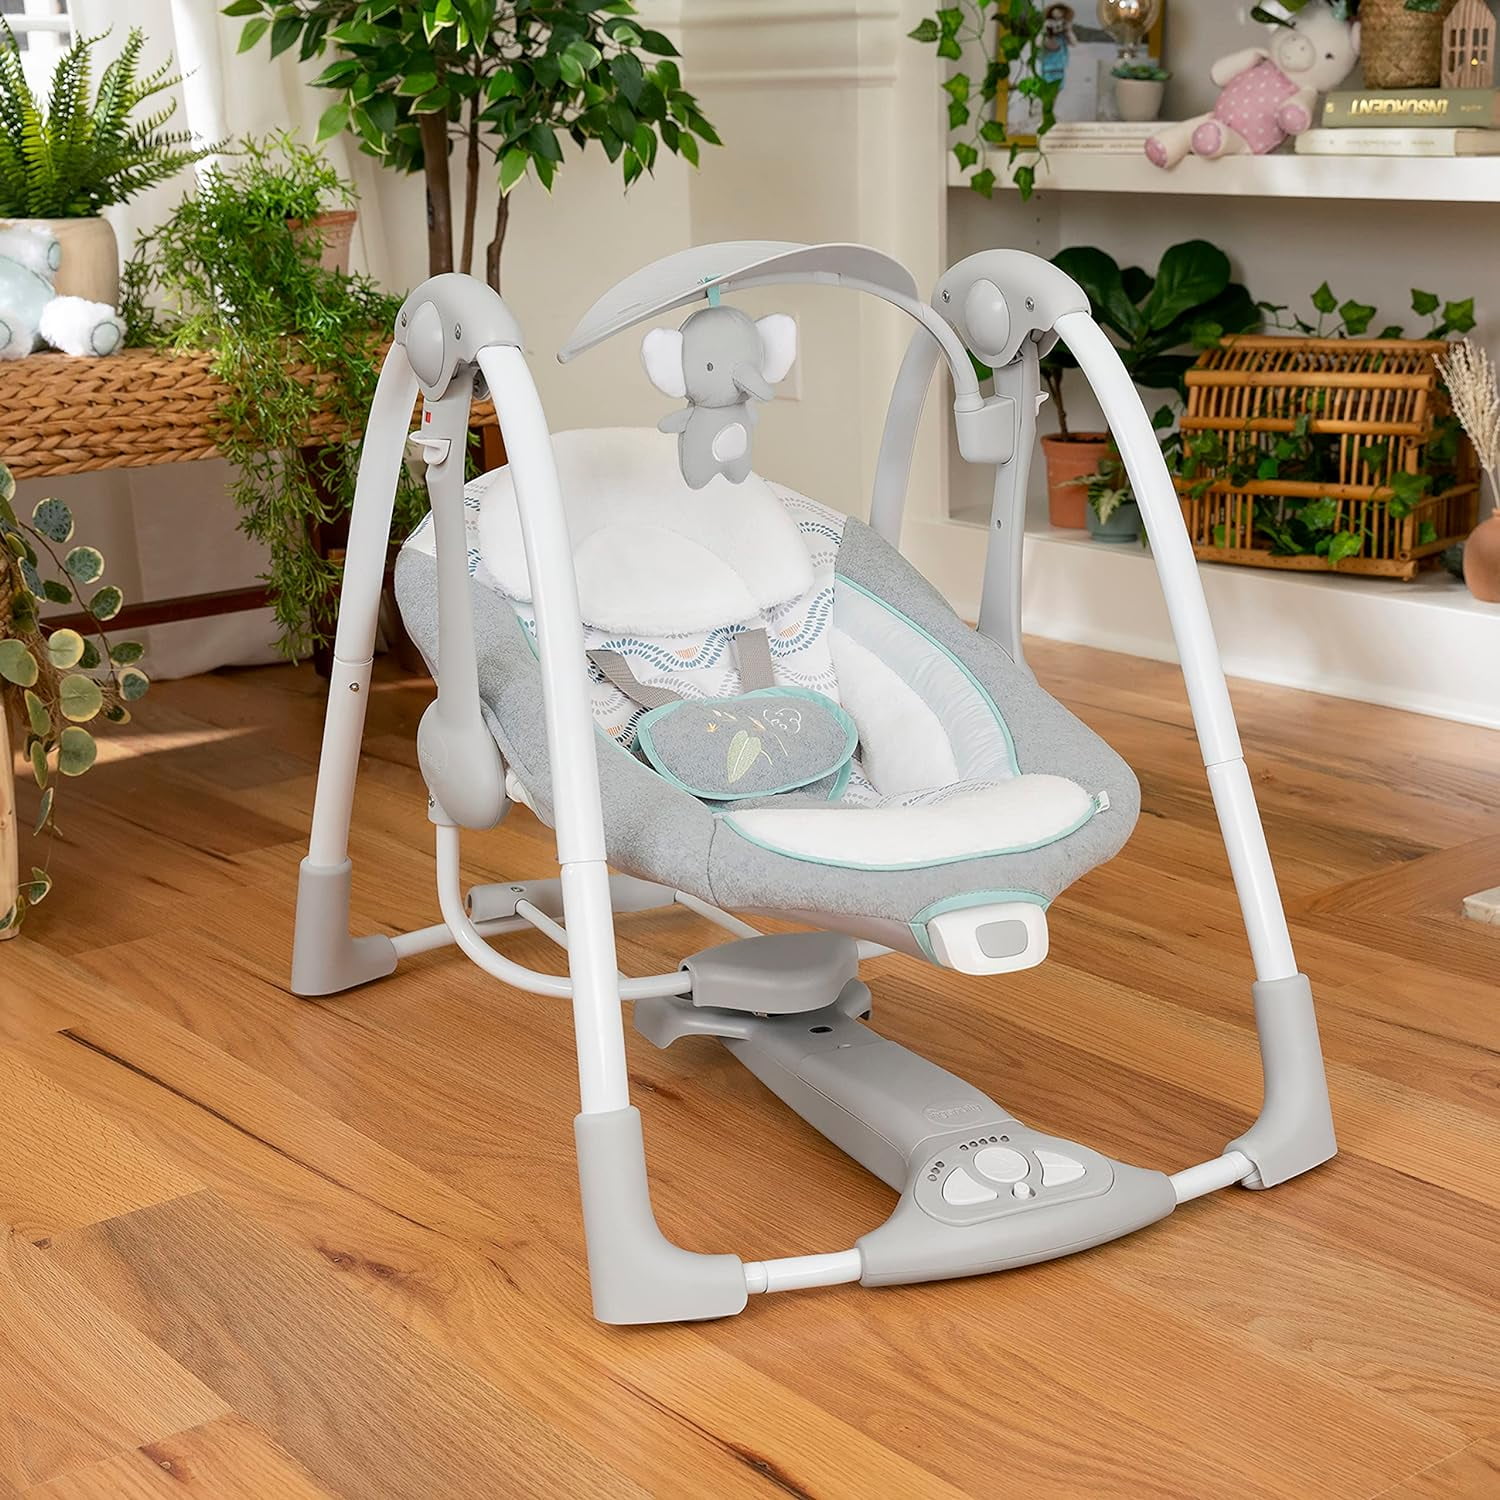 Seat, Nature Vibrations, Months Baby Infant (Swell) Portable Sounds, Compact ConvertMe Ingenuity Swing 2-in-1 & lbs Battery-Saving Automatic 0-9